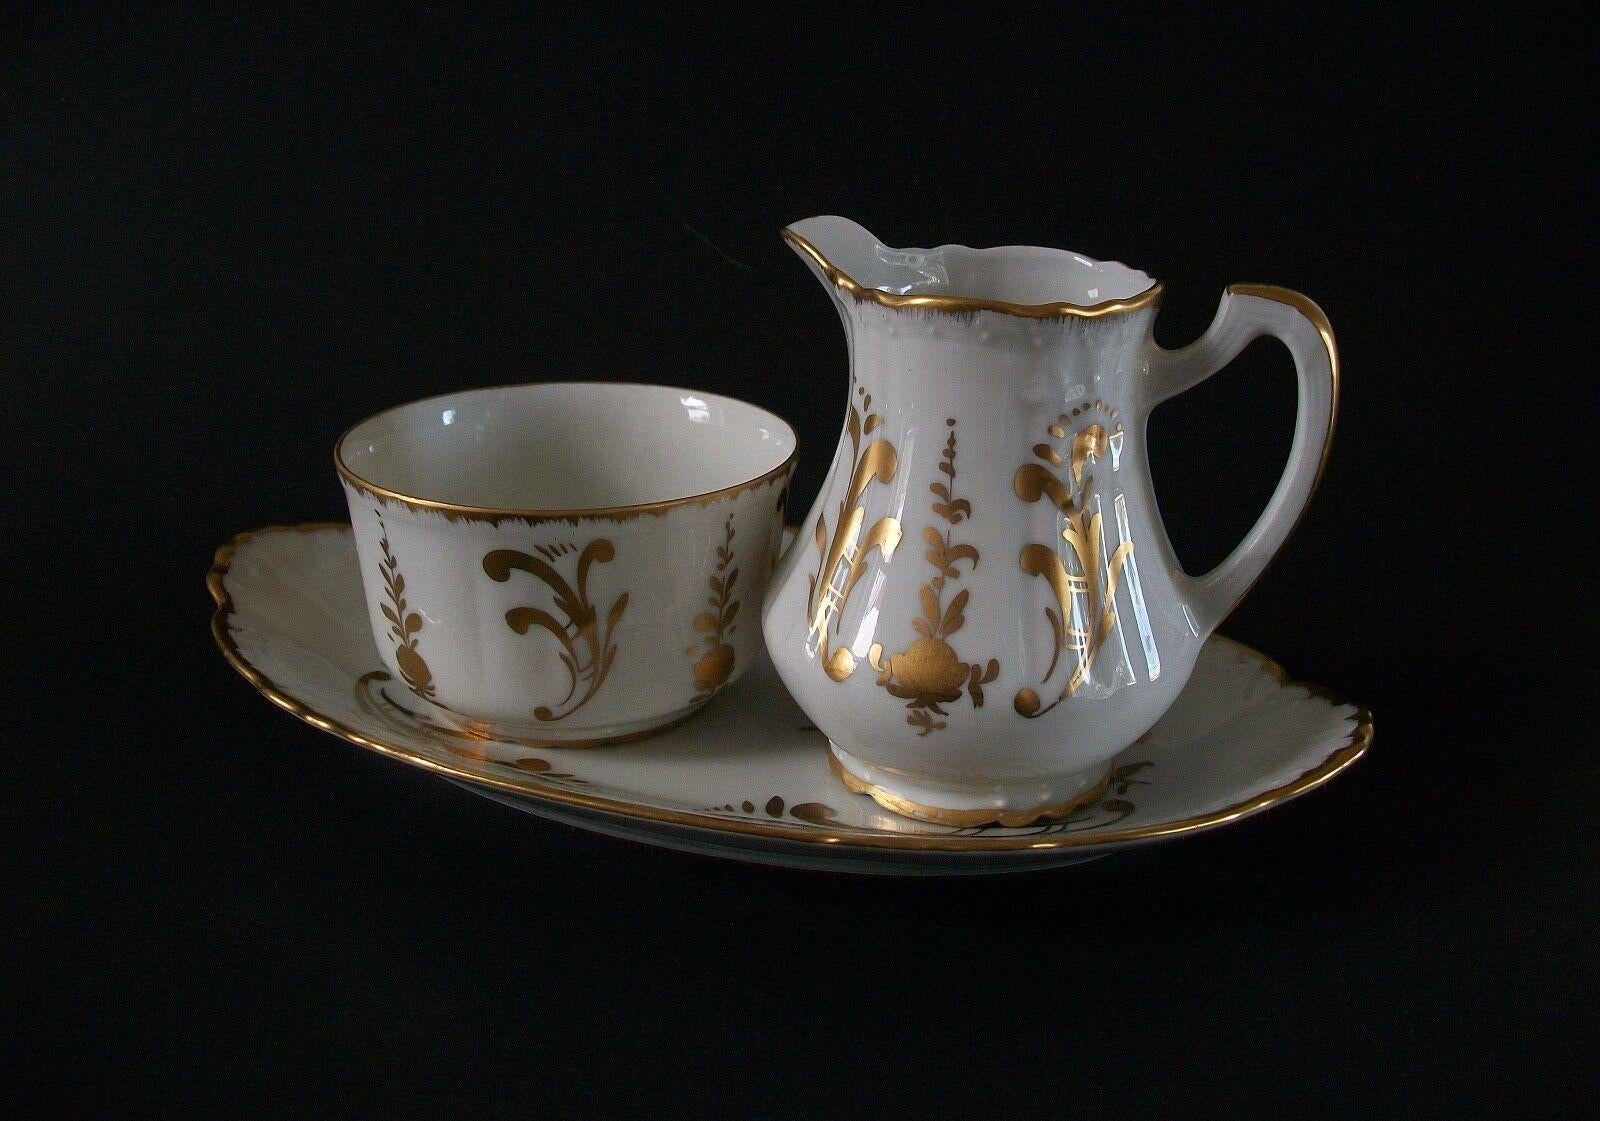 BIRKS (Retailer) LIMOGES (Manufacturer) - Vintage hand painted gilt porcelain cream & sugar with tray - Louis XIV style pattern with embossed pattern/design - each piece with Birks back stamp logo on the base - France - mid 20th